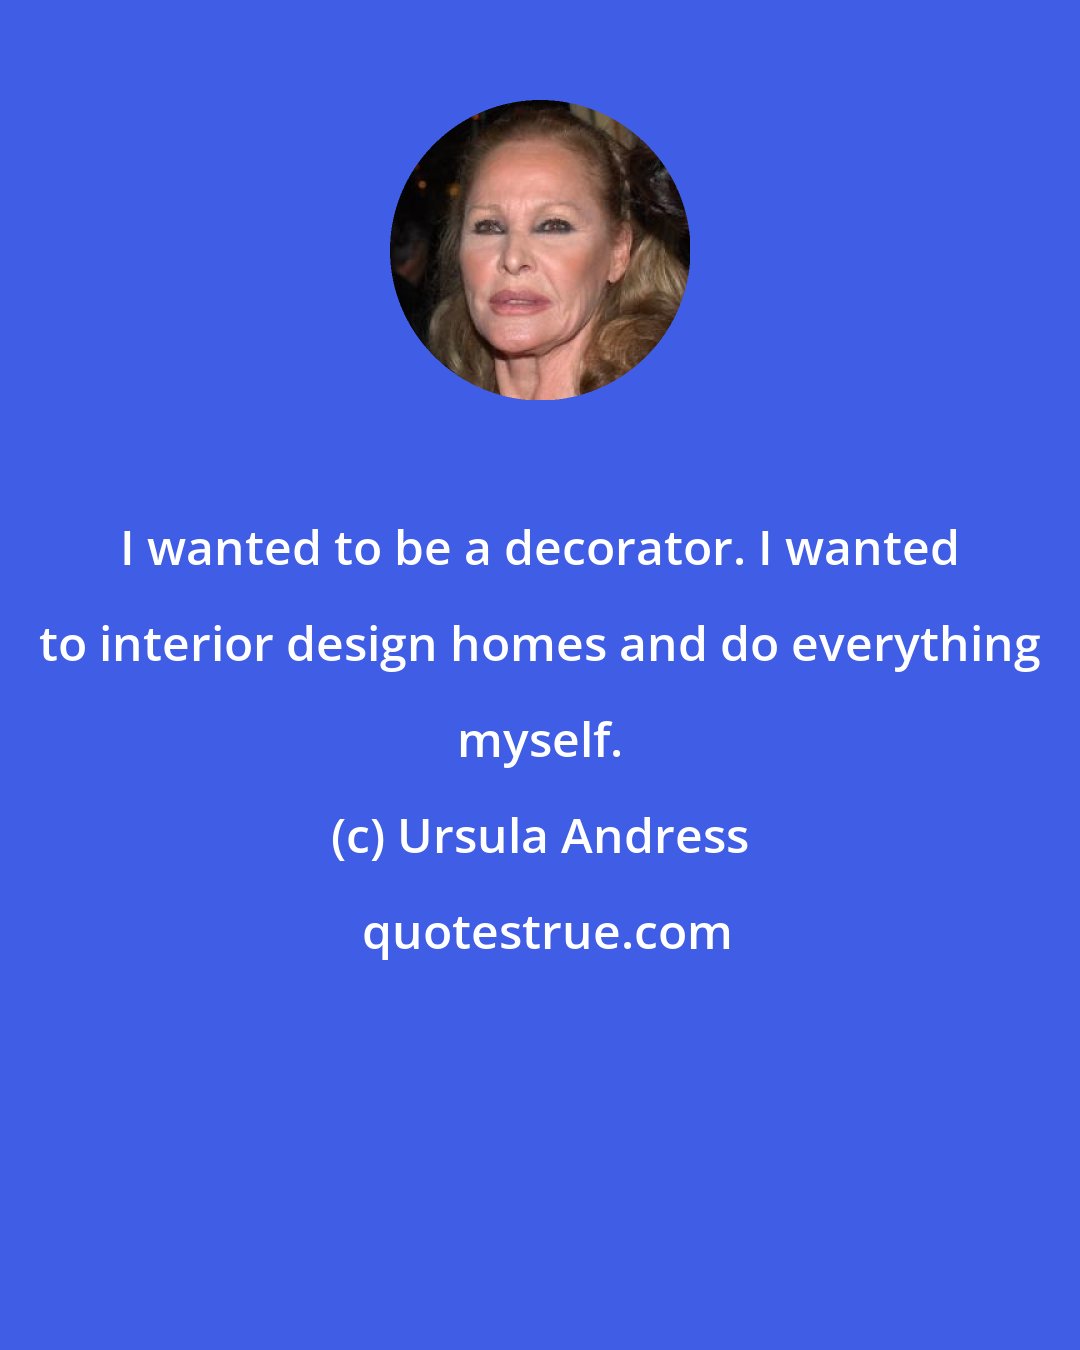 Ursula Andress: I wanted to be a decorator. I wanted to interior design homes and do everything myself.